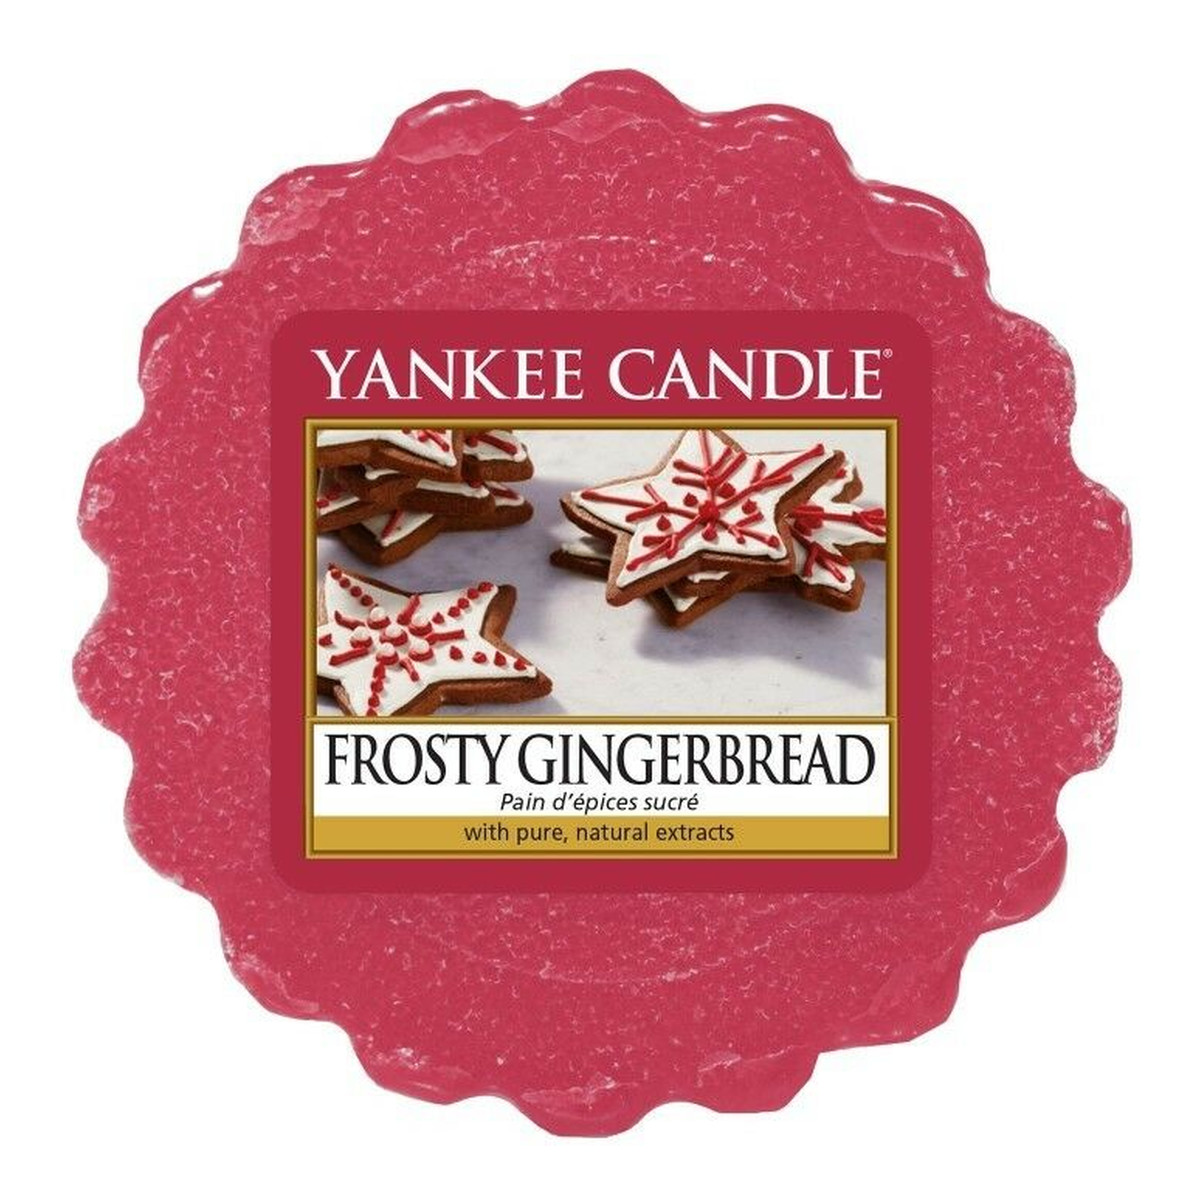 Yankee Candle Wax wosk zapachowy Frosty Gingerbread 22g